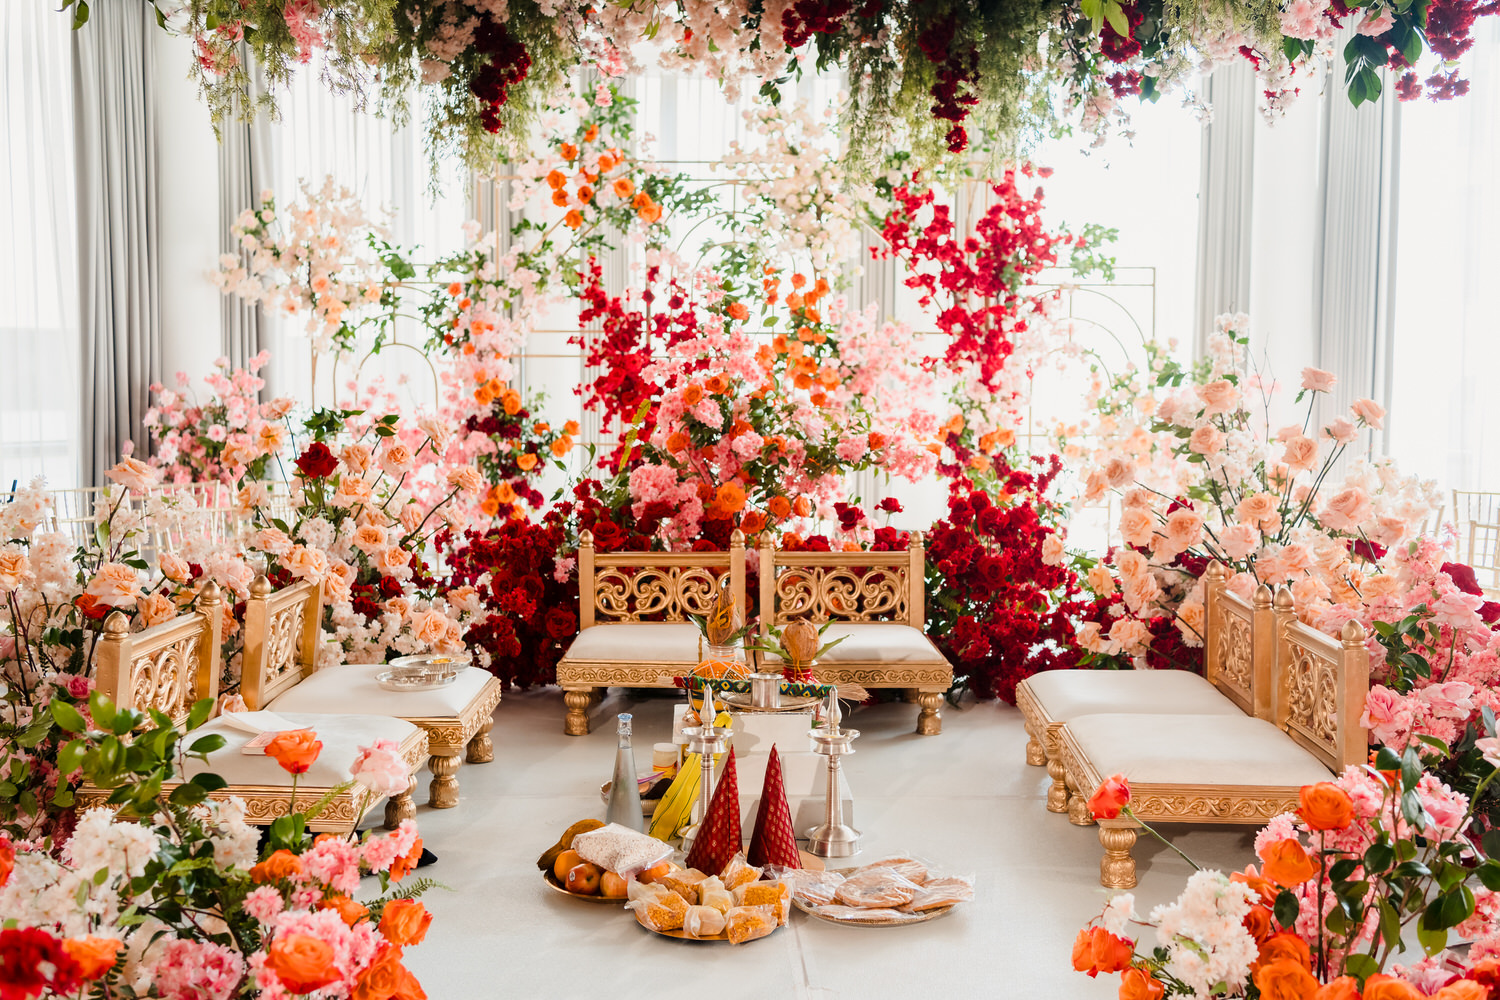 An indian wedding ceremony set up with flowers.